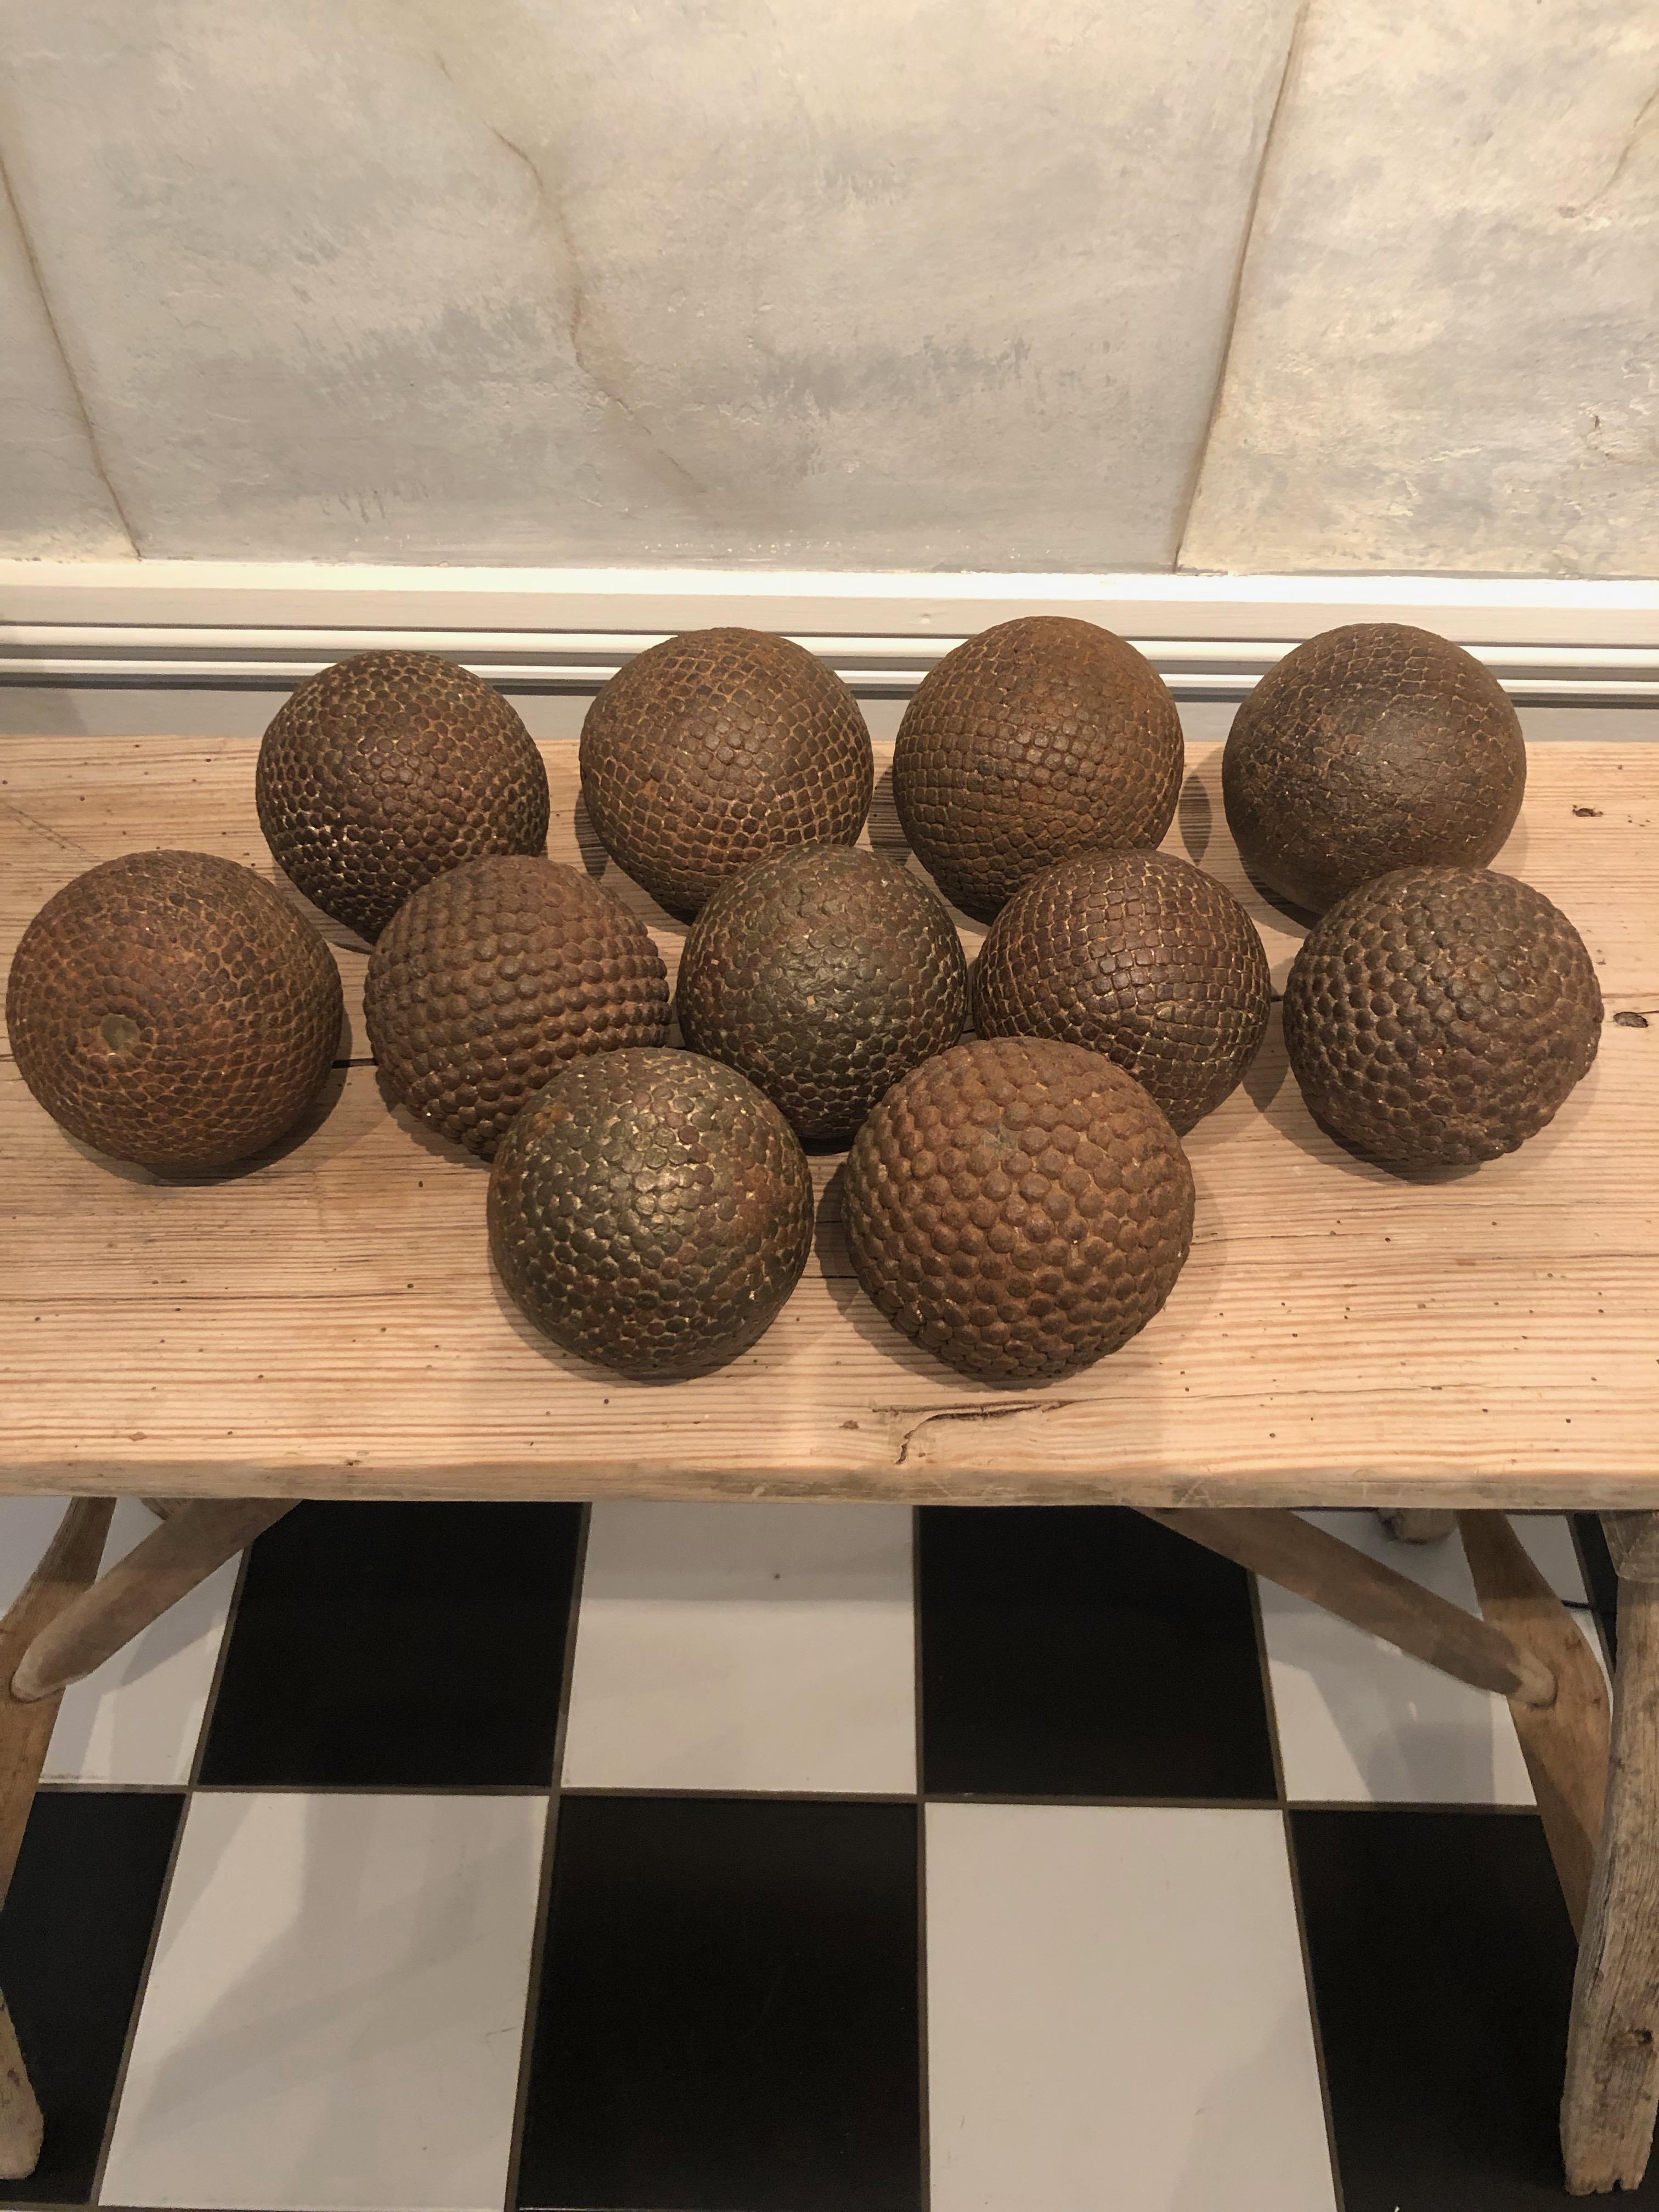 Boules are used to play Pétanque, the French equivalent of Boccé, and this collection is stunning. Made from wood with iron studs for durability and dating to the 1840s, the set comprises two different sizes, 9 larger and 2 smaller ones and all